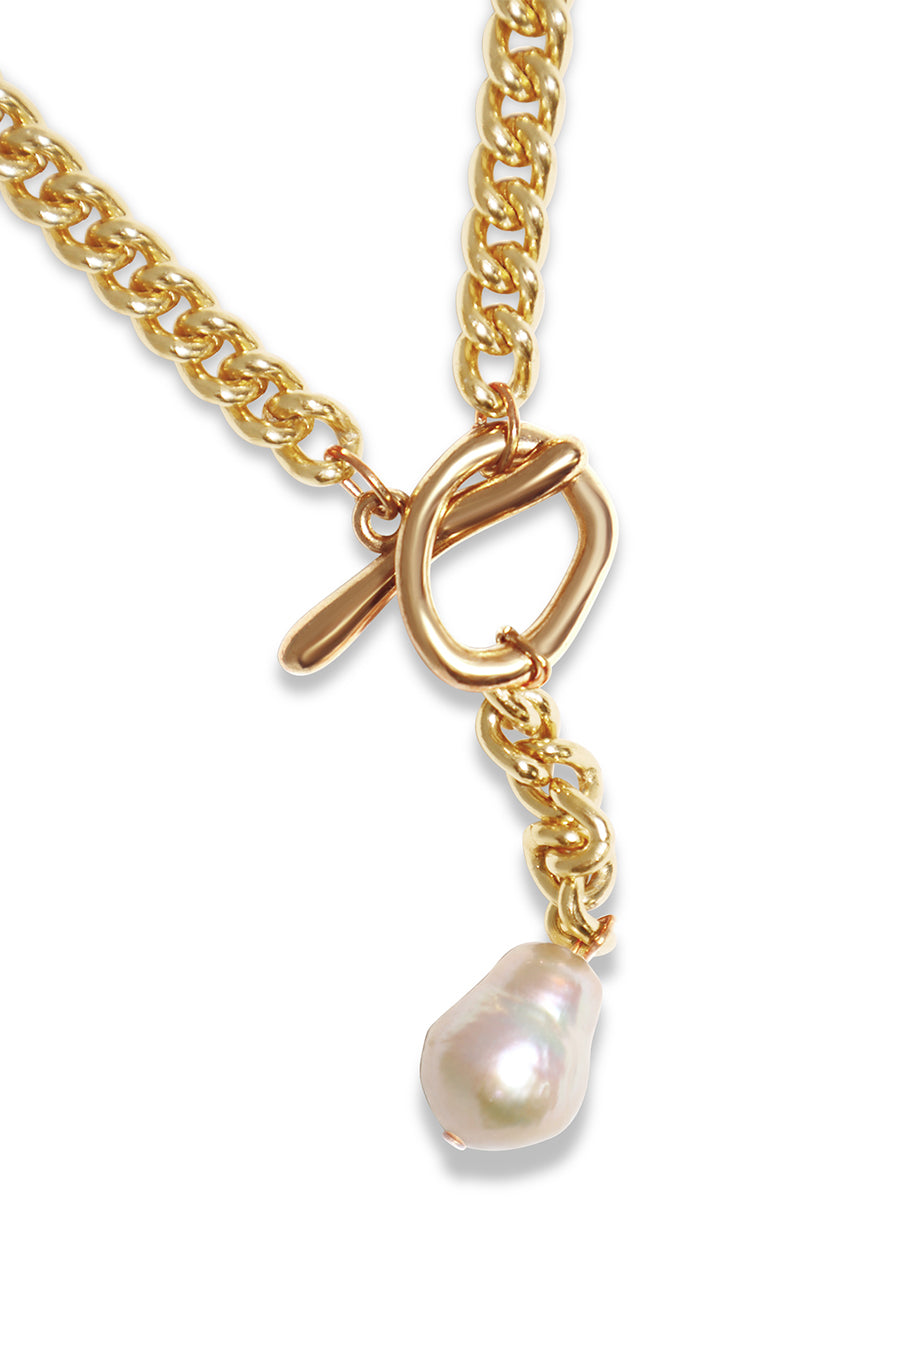 IK Plated Gold Necklace with Pearls close view